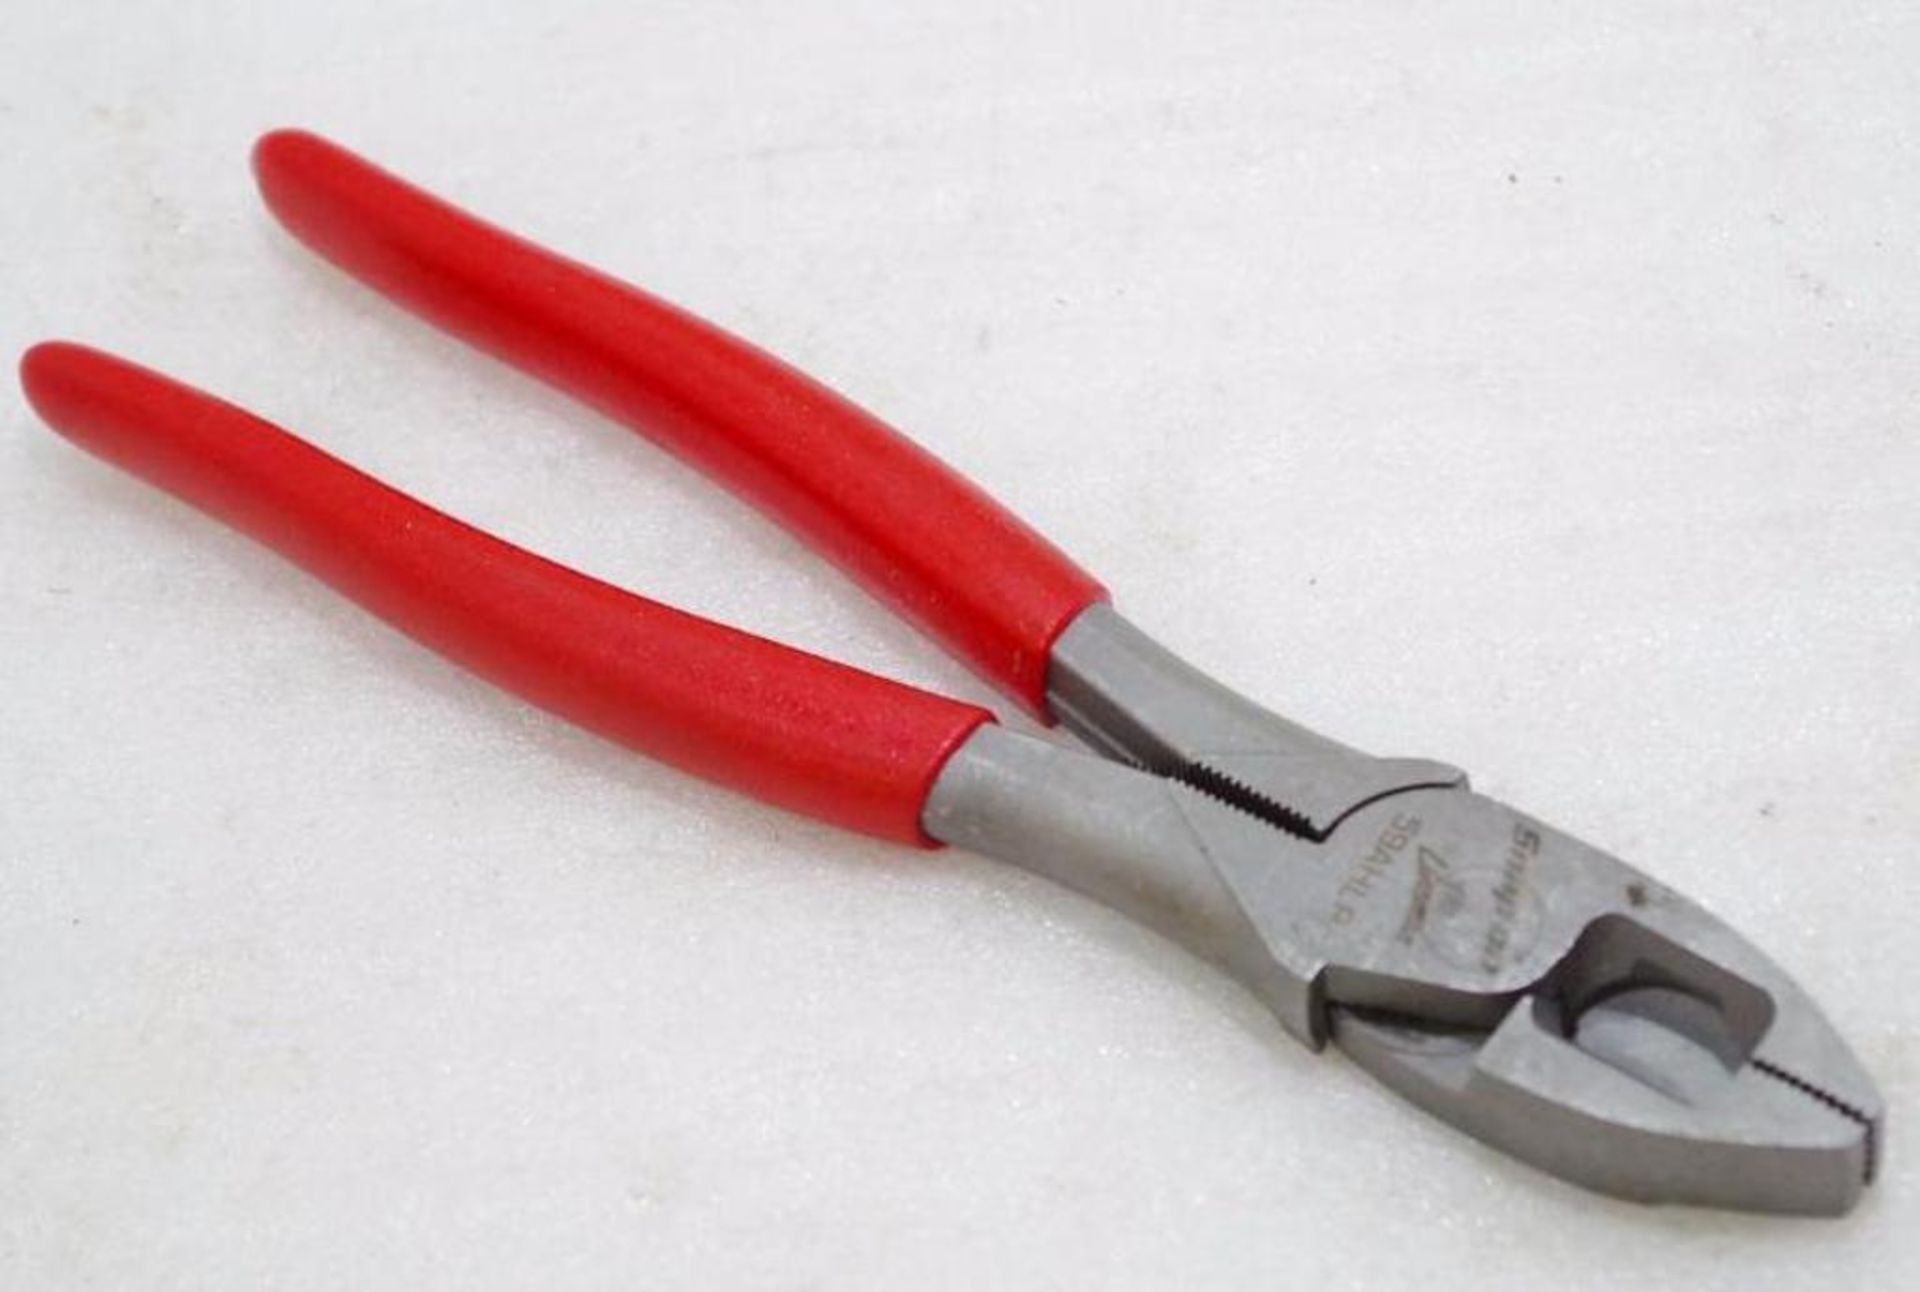 NEW SNAP-ON Lineman's Pliers, M/N 59AHLP, Made in USA - Image 4 of 5